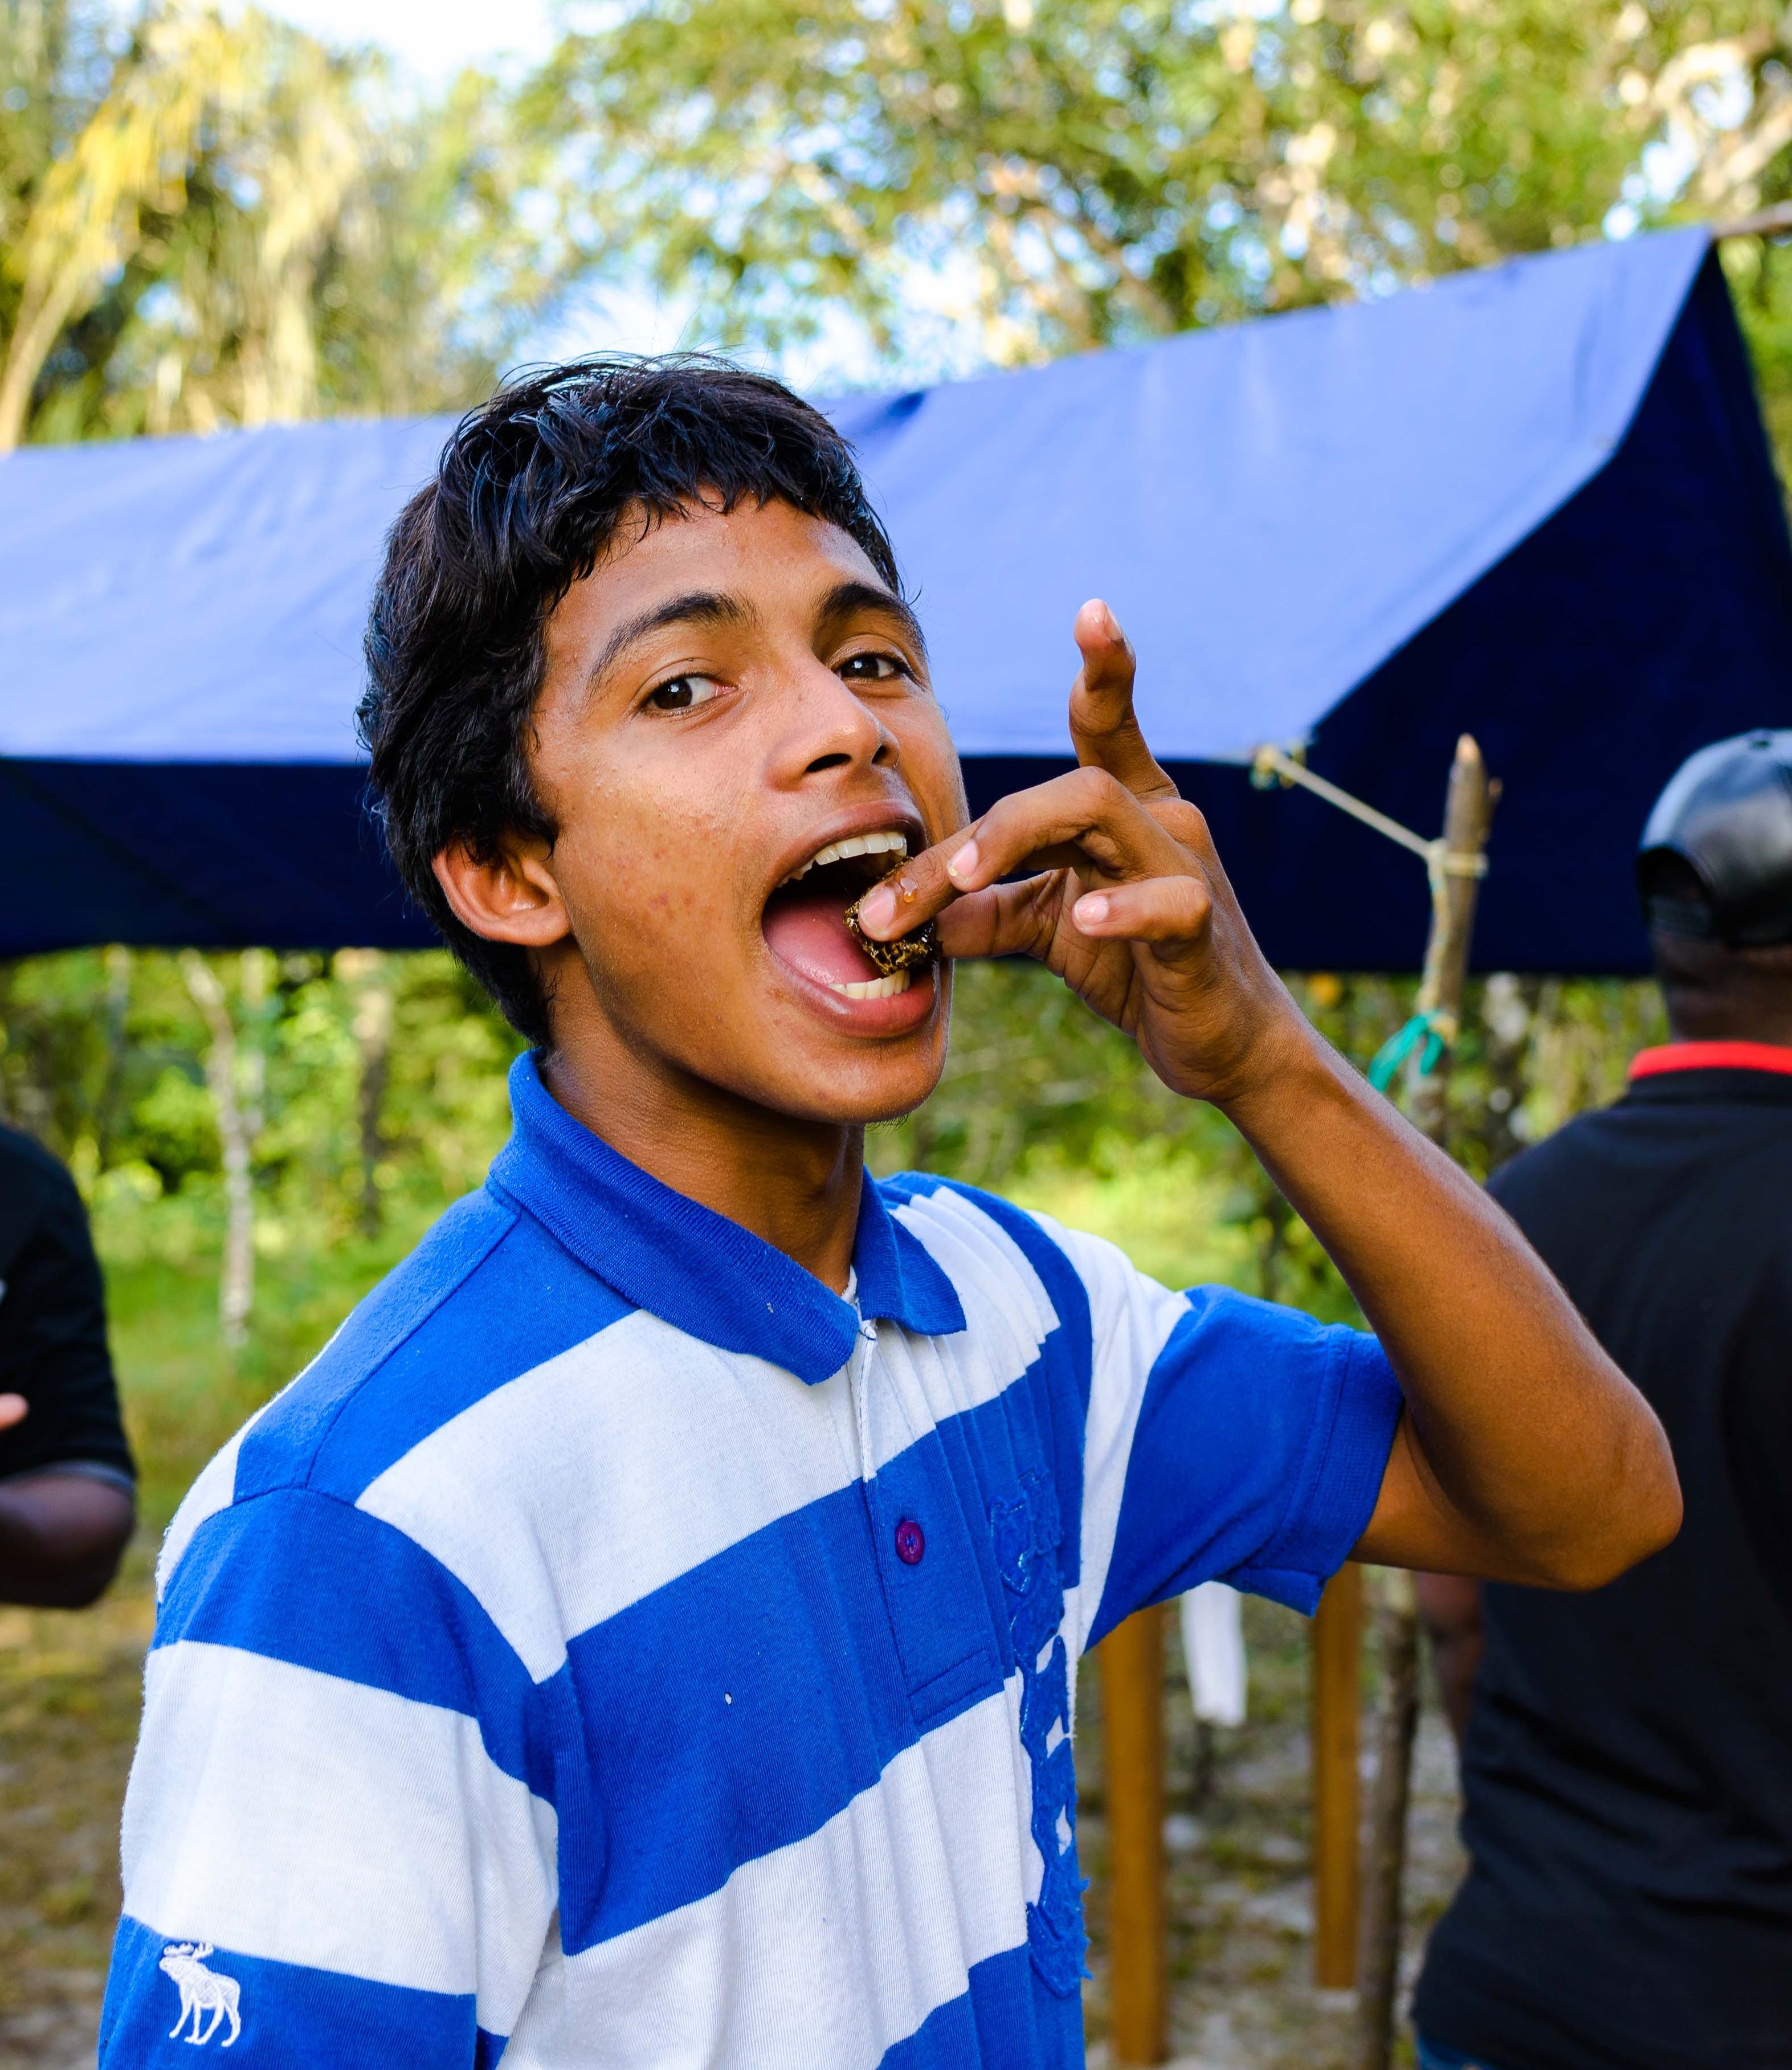 A young workshop participant samples fresh honey from a hive.